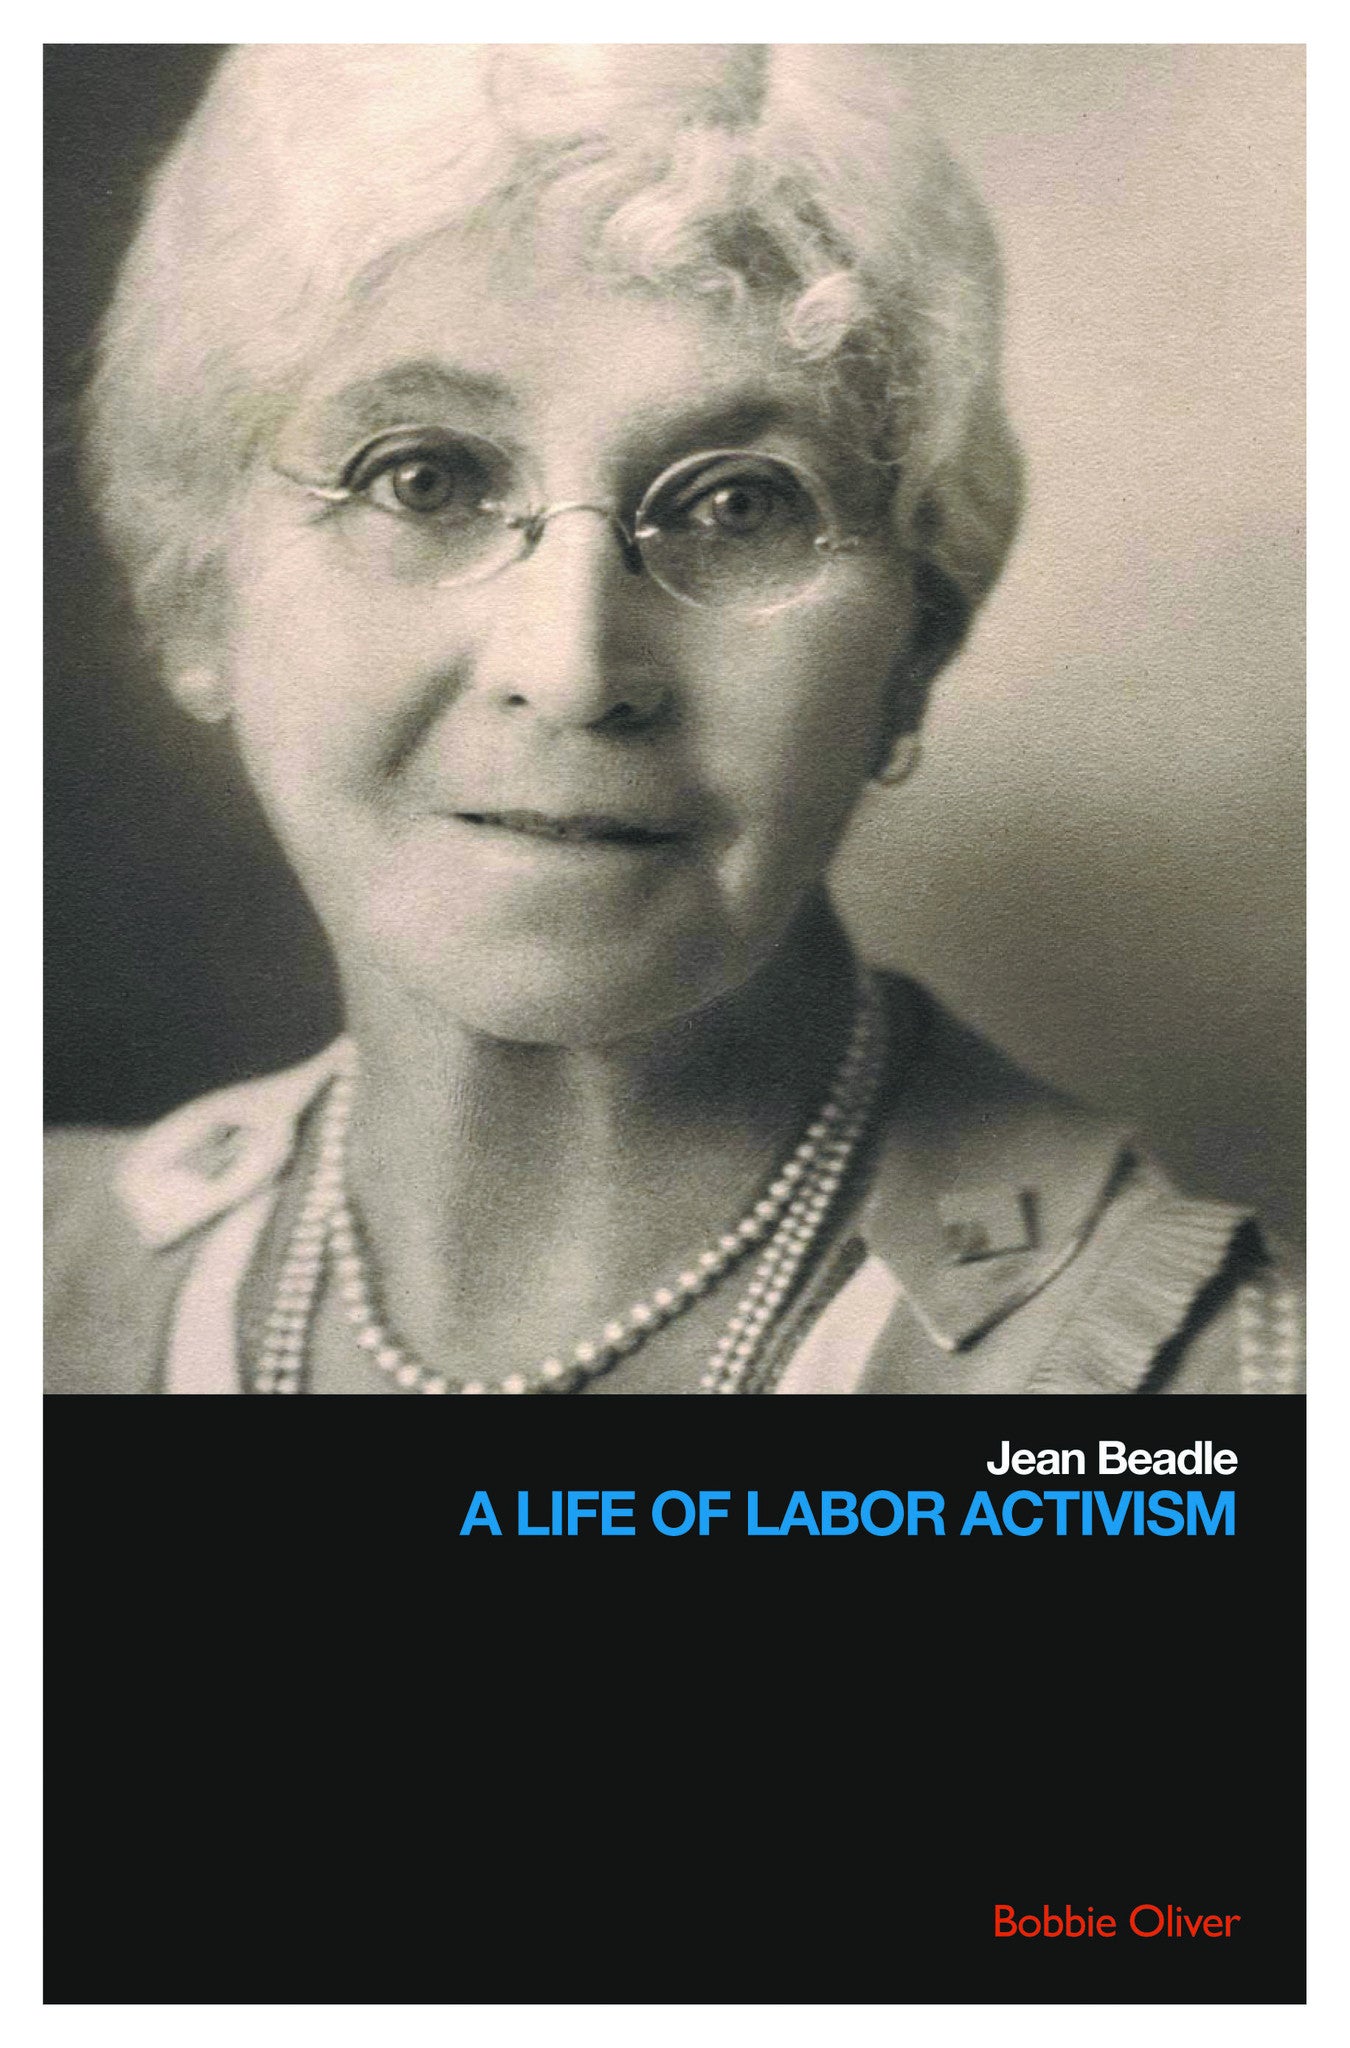 Jean Beadle: A Life of Labor Activism